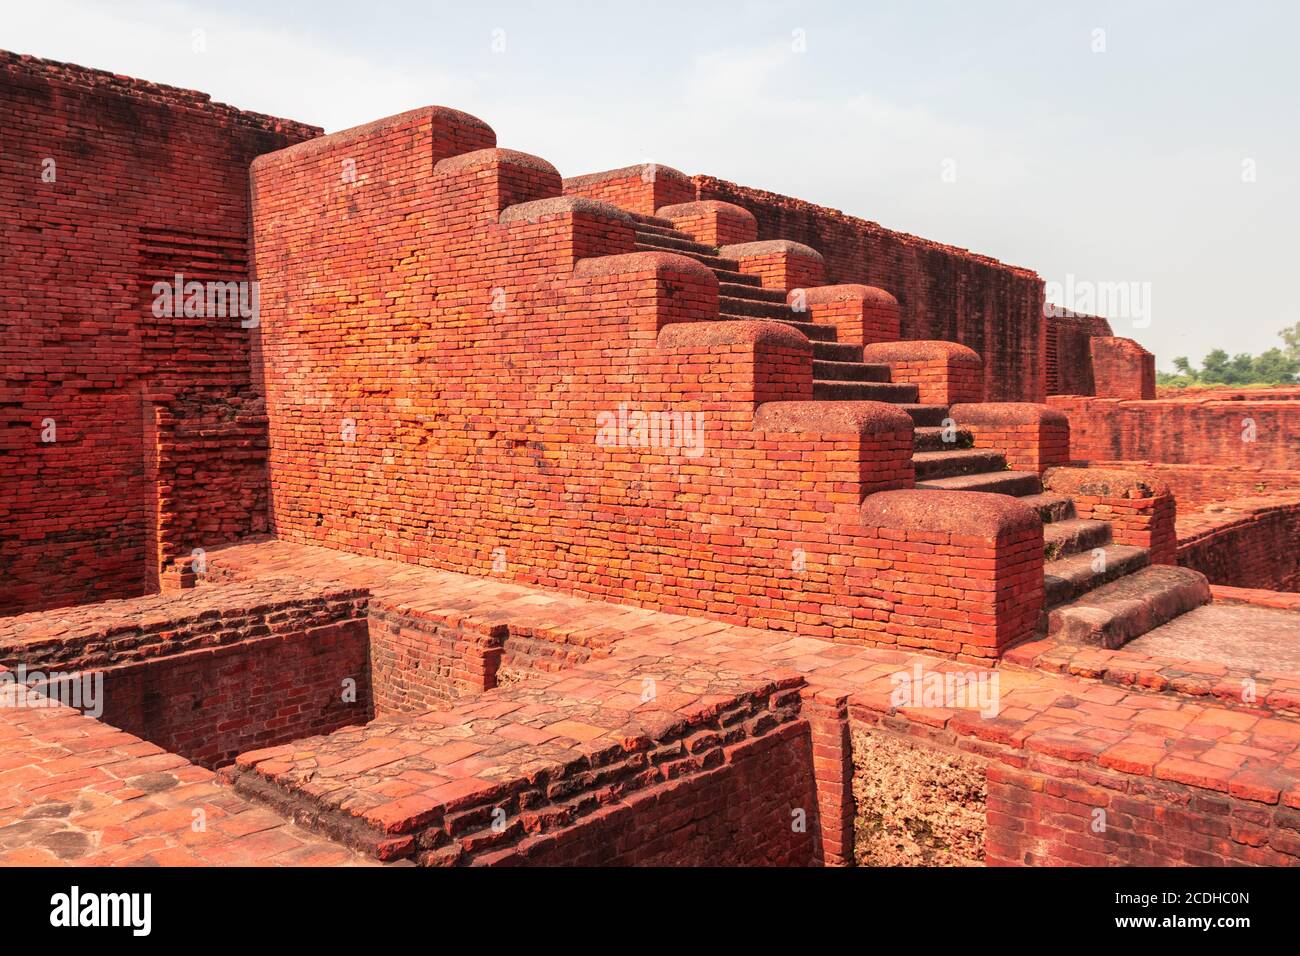 the ruins of nalanda image is taken at nalanda bihar india. it was a massive Buddhist monastery in the ancient kingdom of Magadha. It was a center of Stock Photo